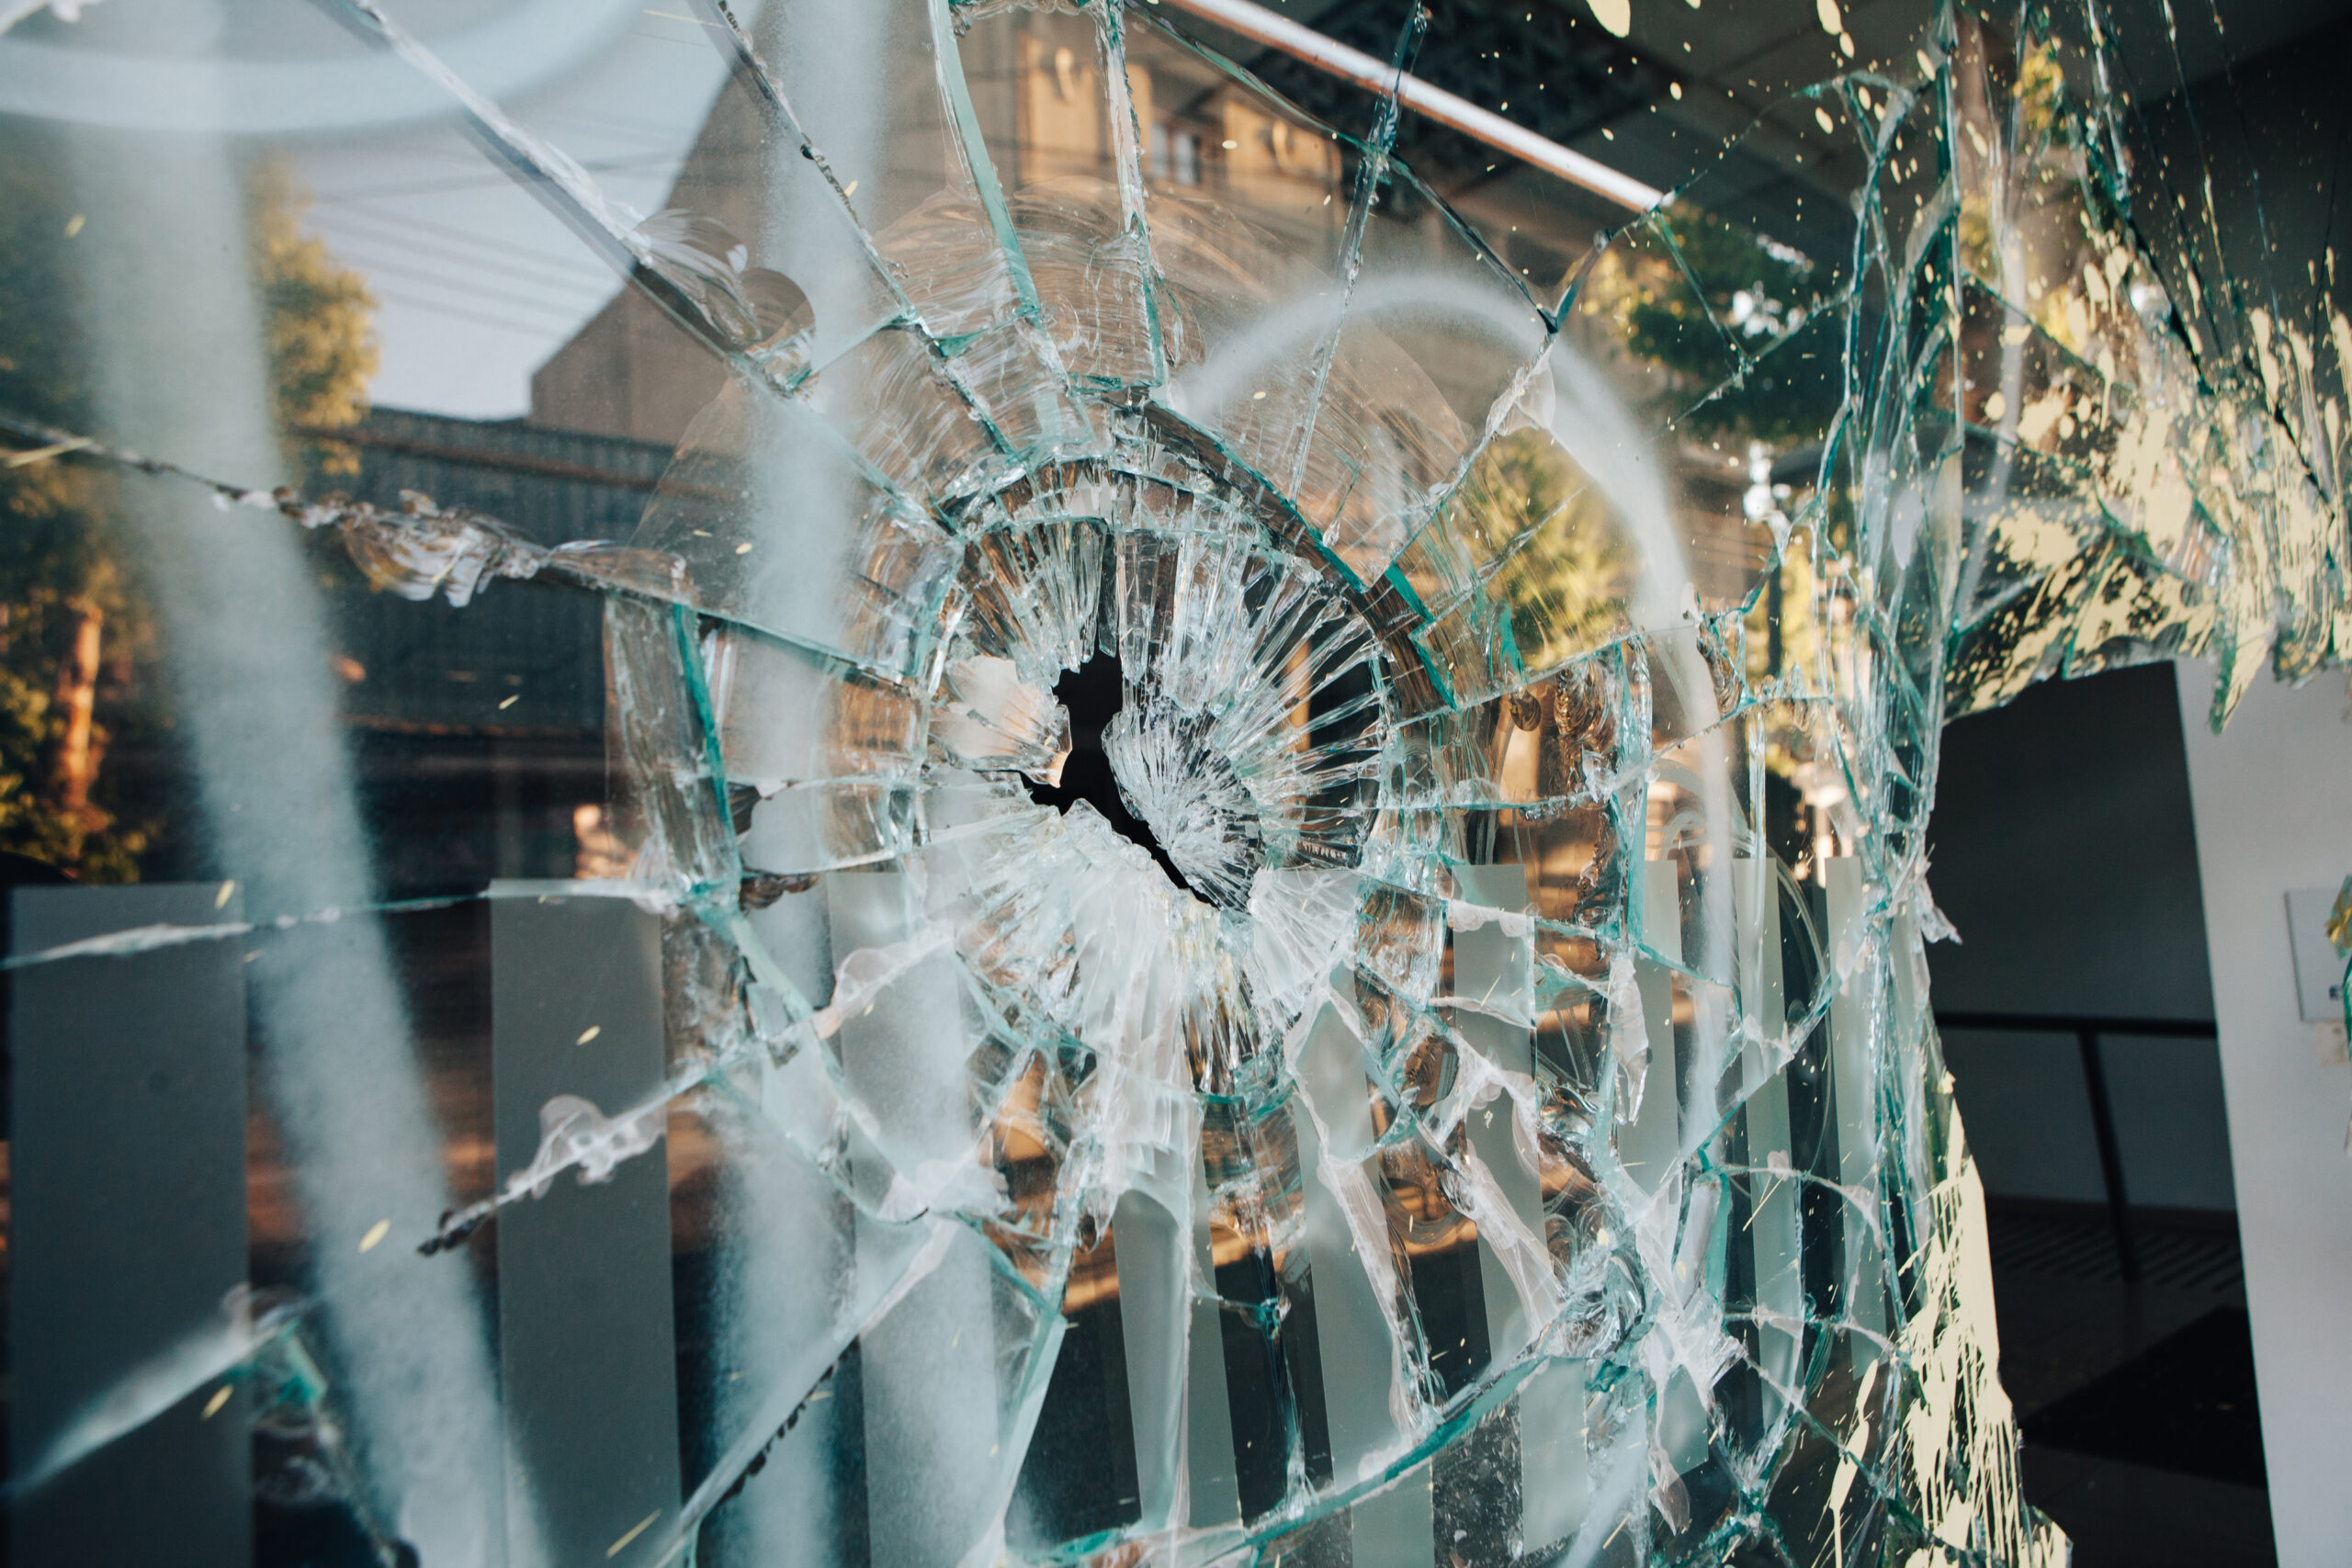 A guide on the types of insurance policies a business should have in place to protect its employees from workplace violence.